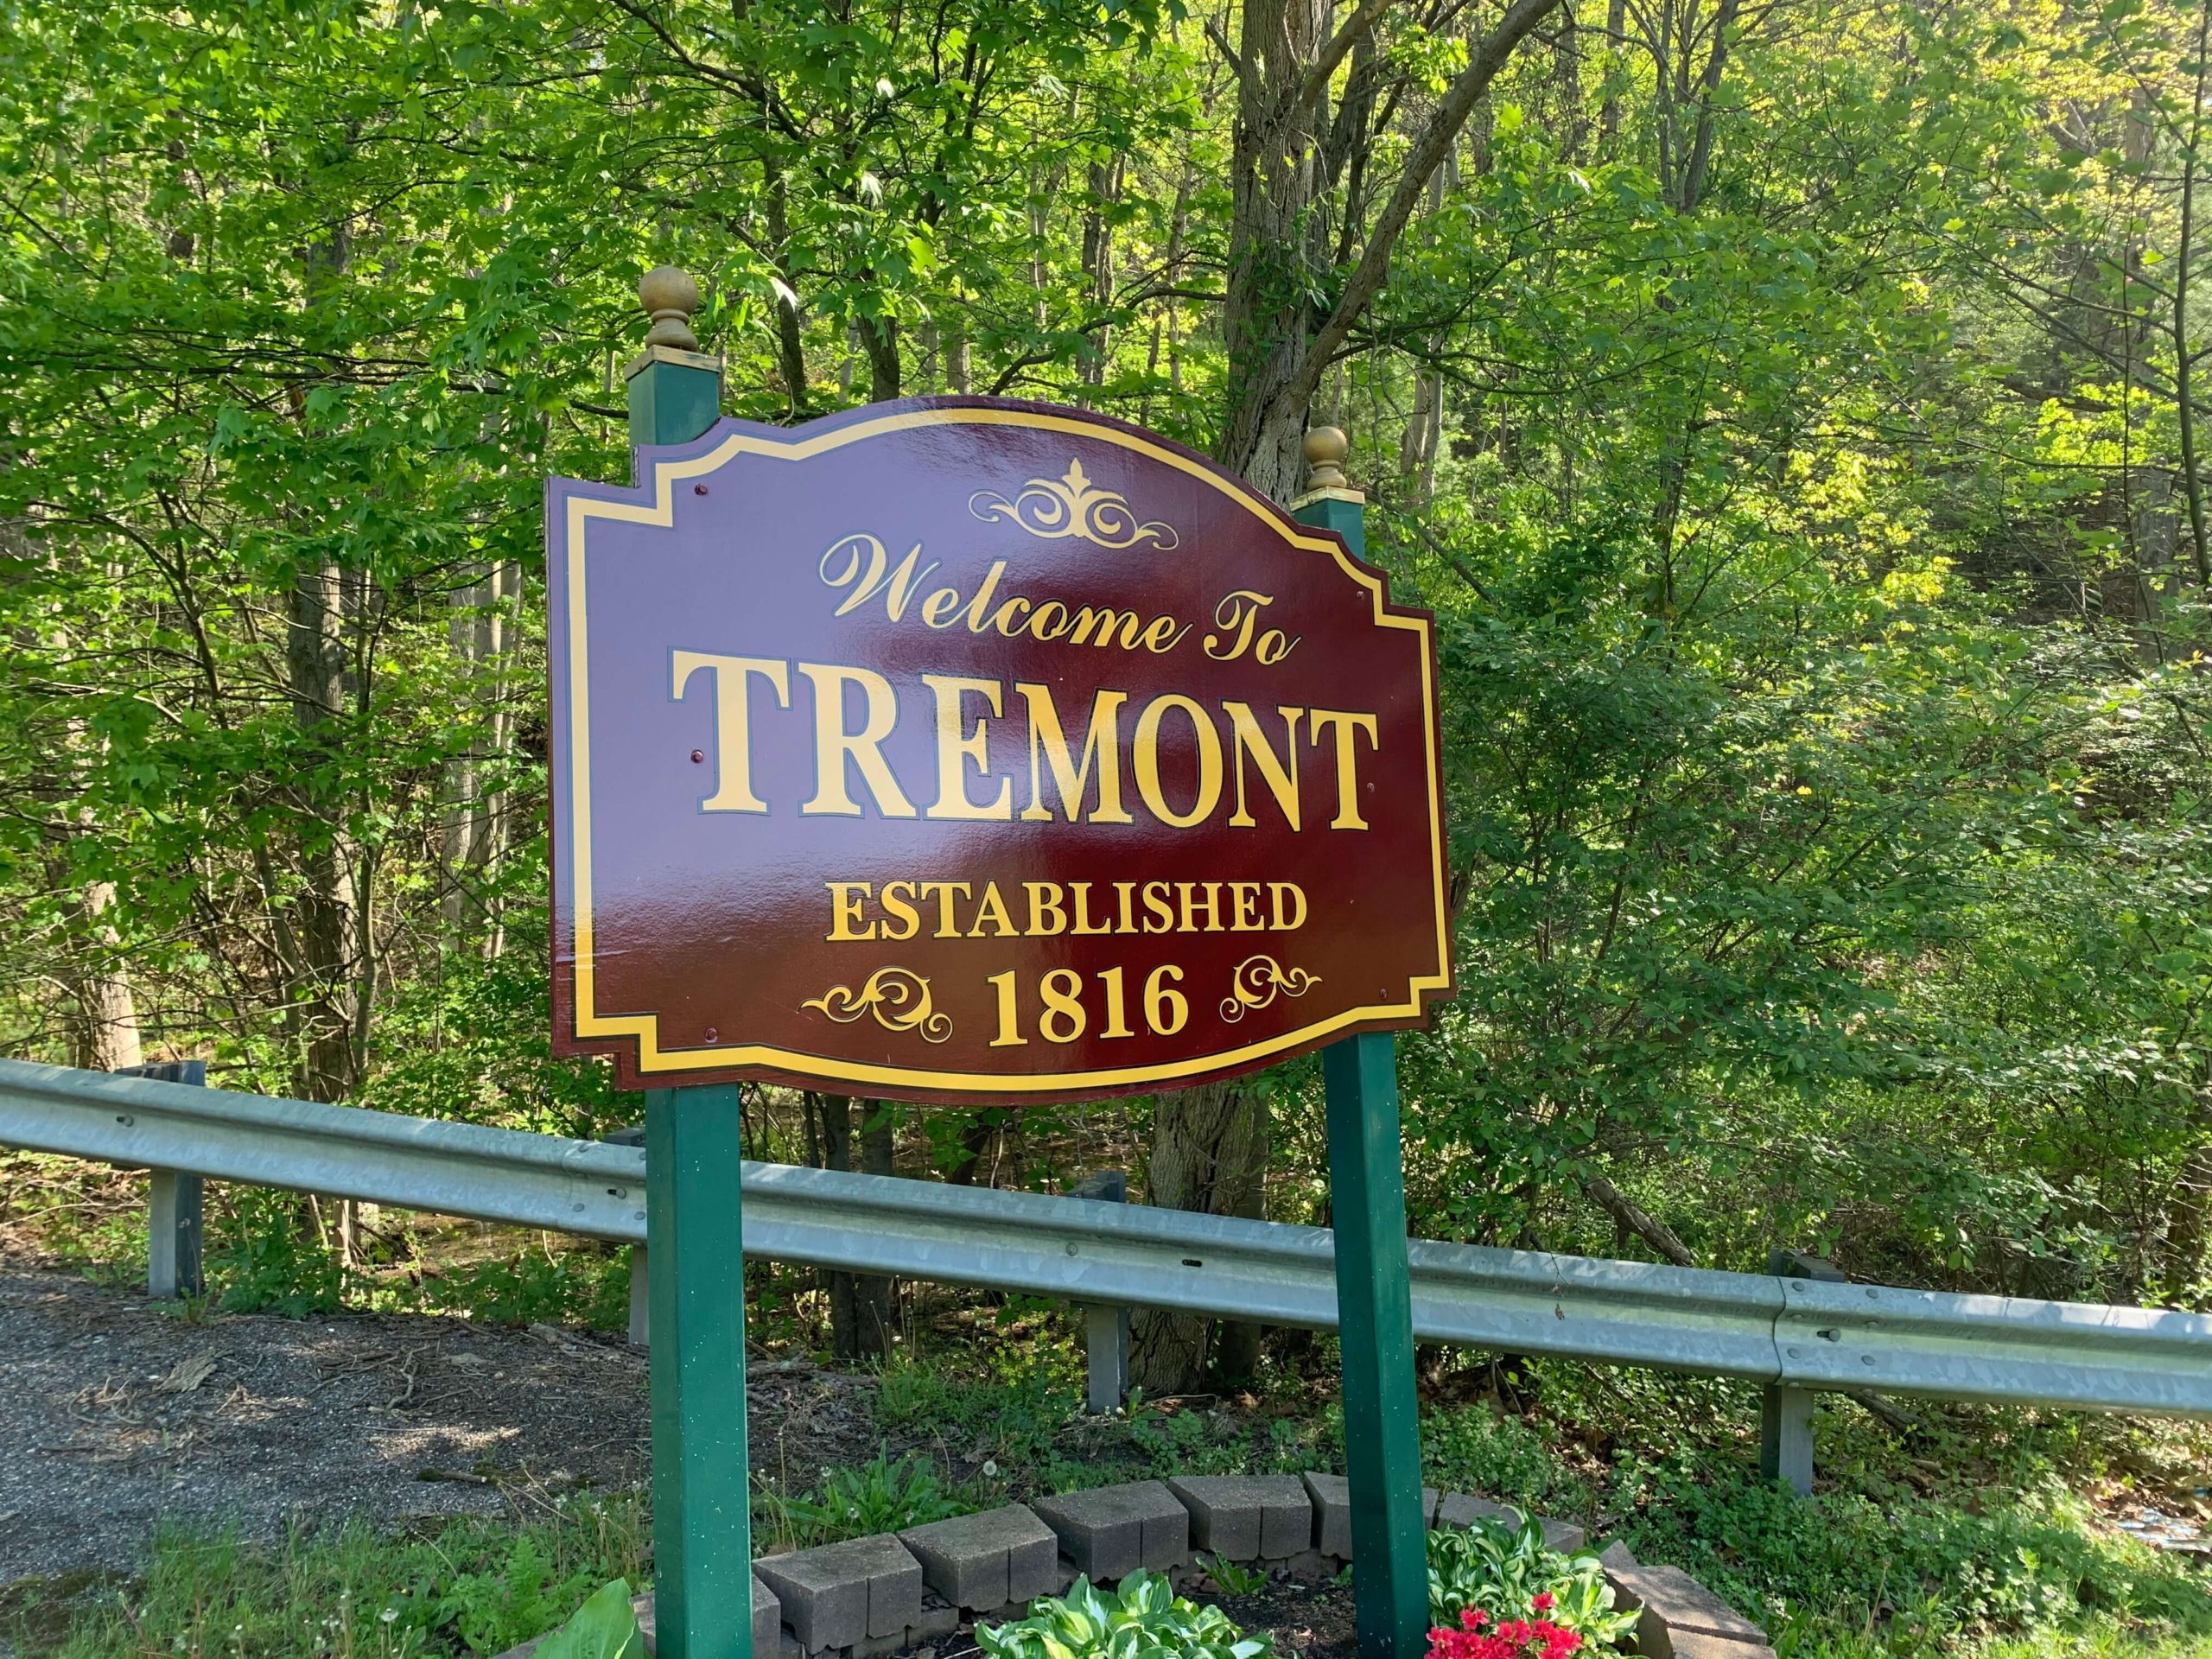 Welcome to Tremont Pennsylvania sign.